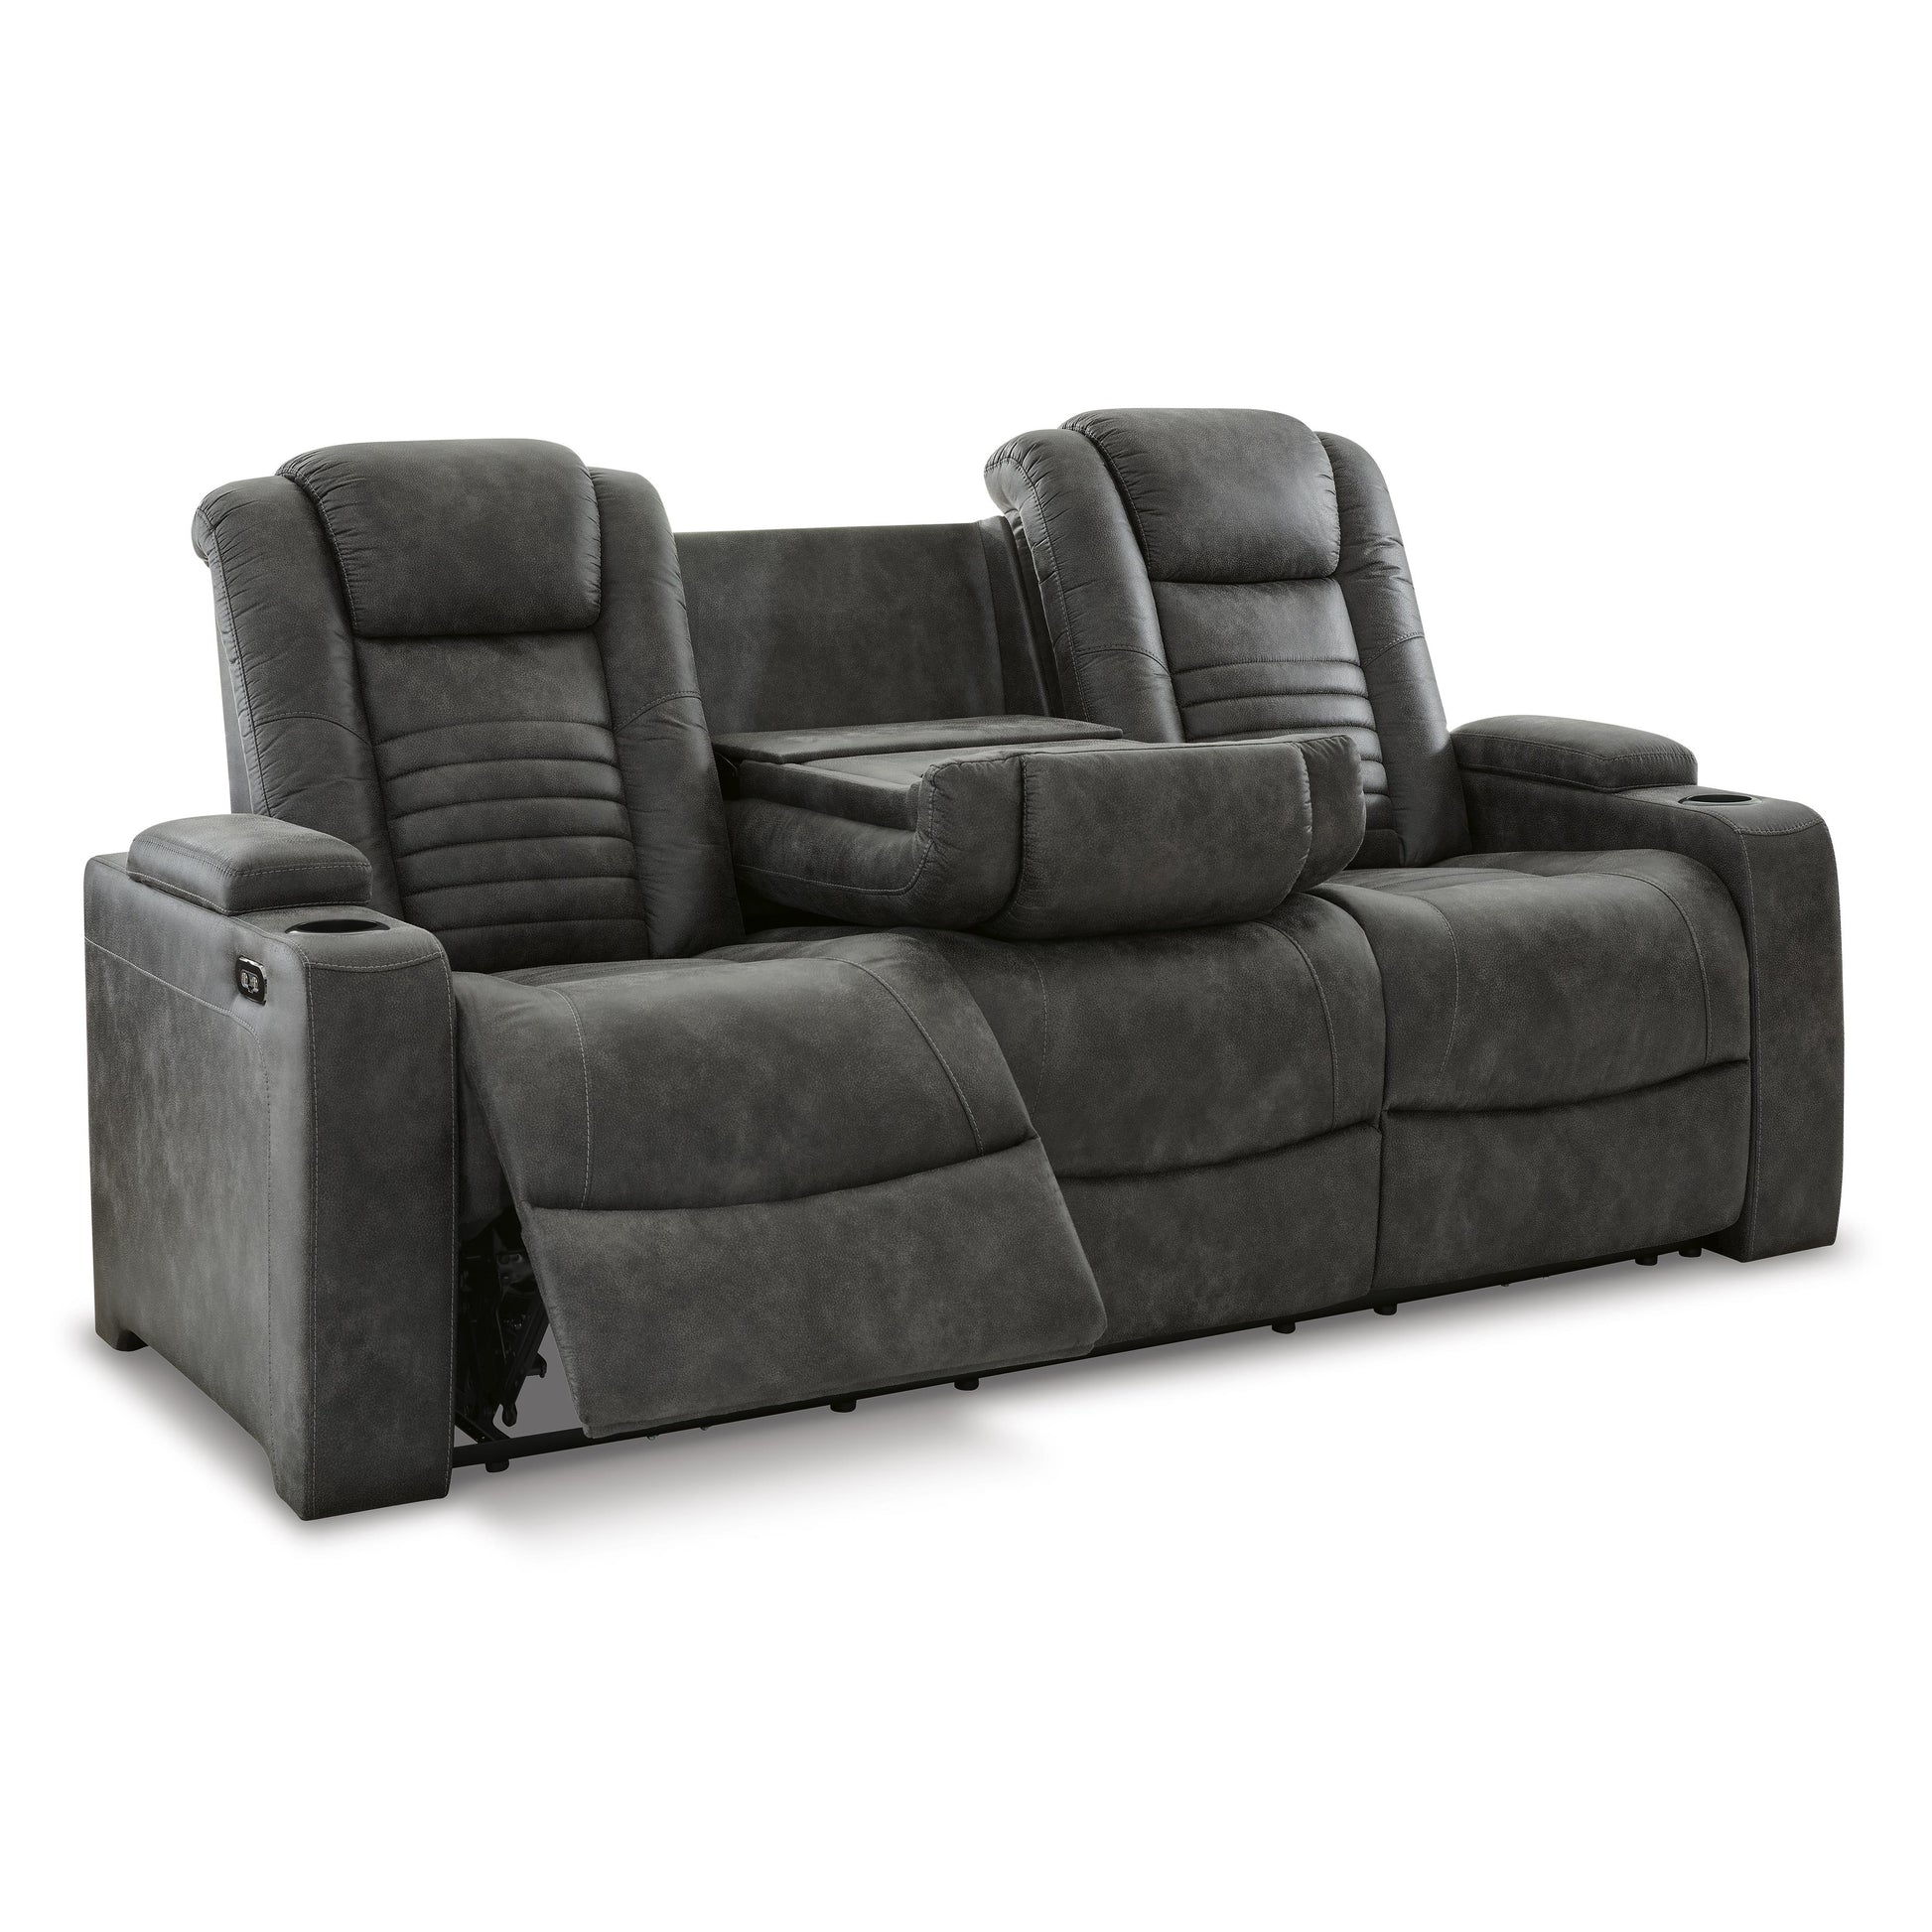 Signature Design by Ashley Soundcheck Power Reclining Leather Look Sofa 3060615 IMAGE 2